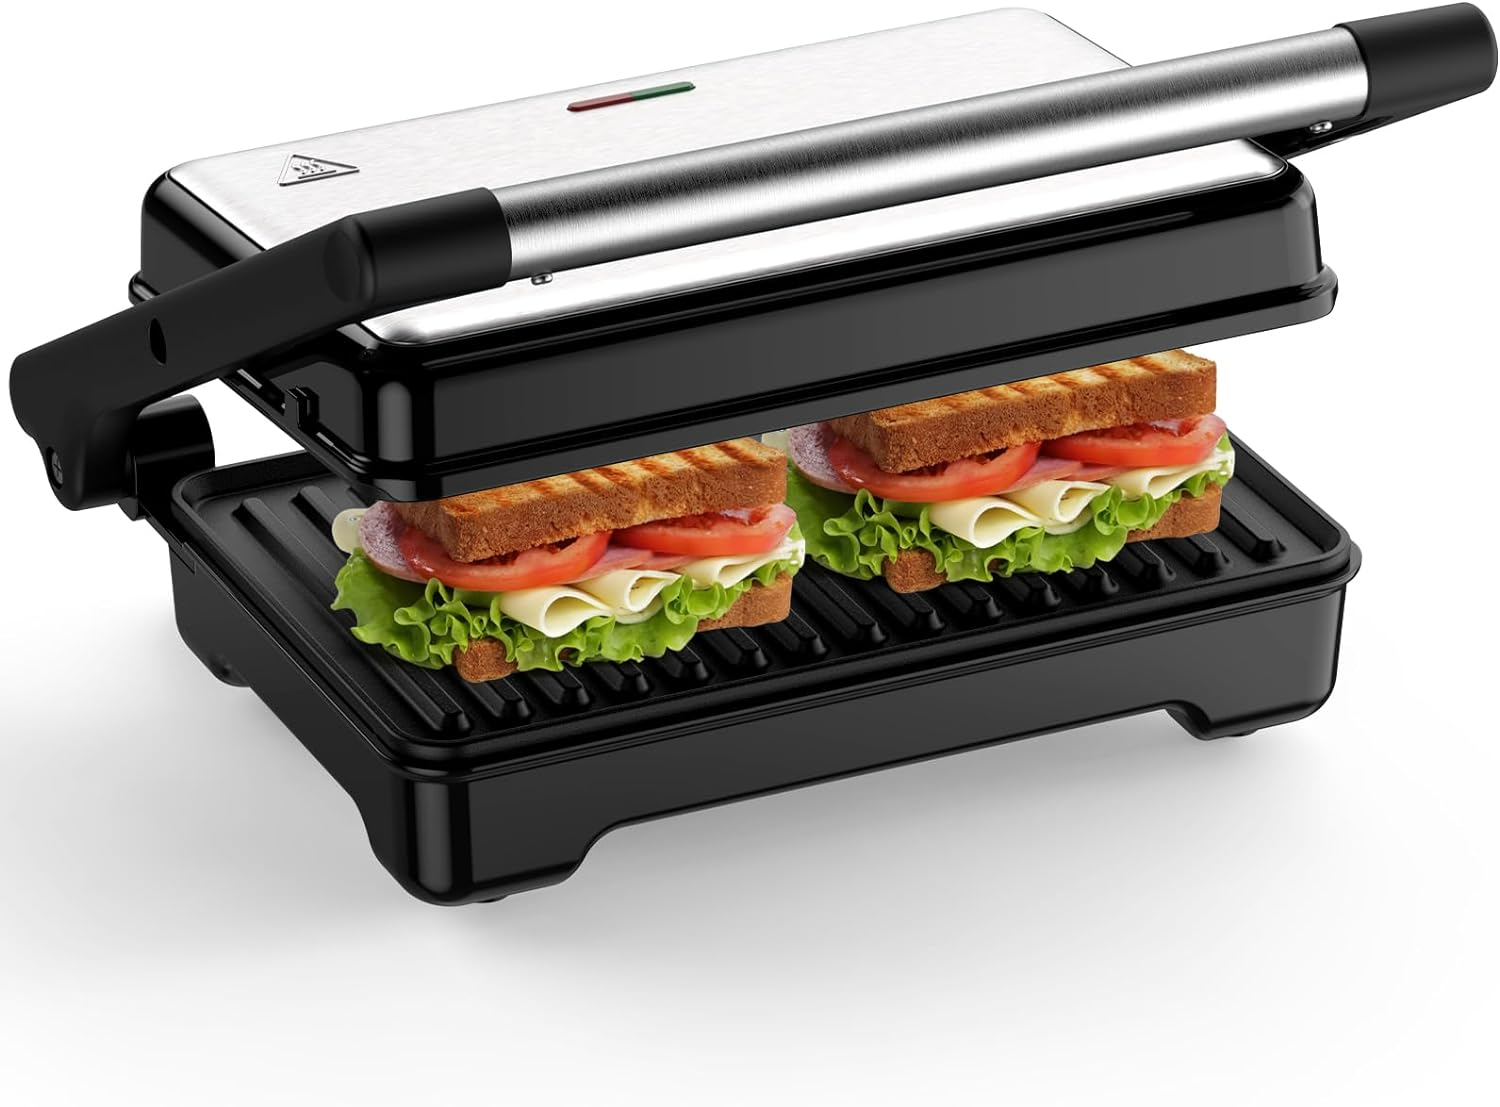 Panini Press OSTBA, Sandwich Press Grill 1200W, XXL Panini Maker with Nonstick Plates, Adjustable Temperature, Opens 180 Degrees, Easy to Clean - Barbecue Whizz...Watch My Smoke!